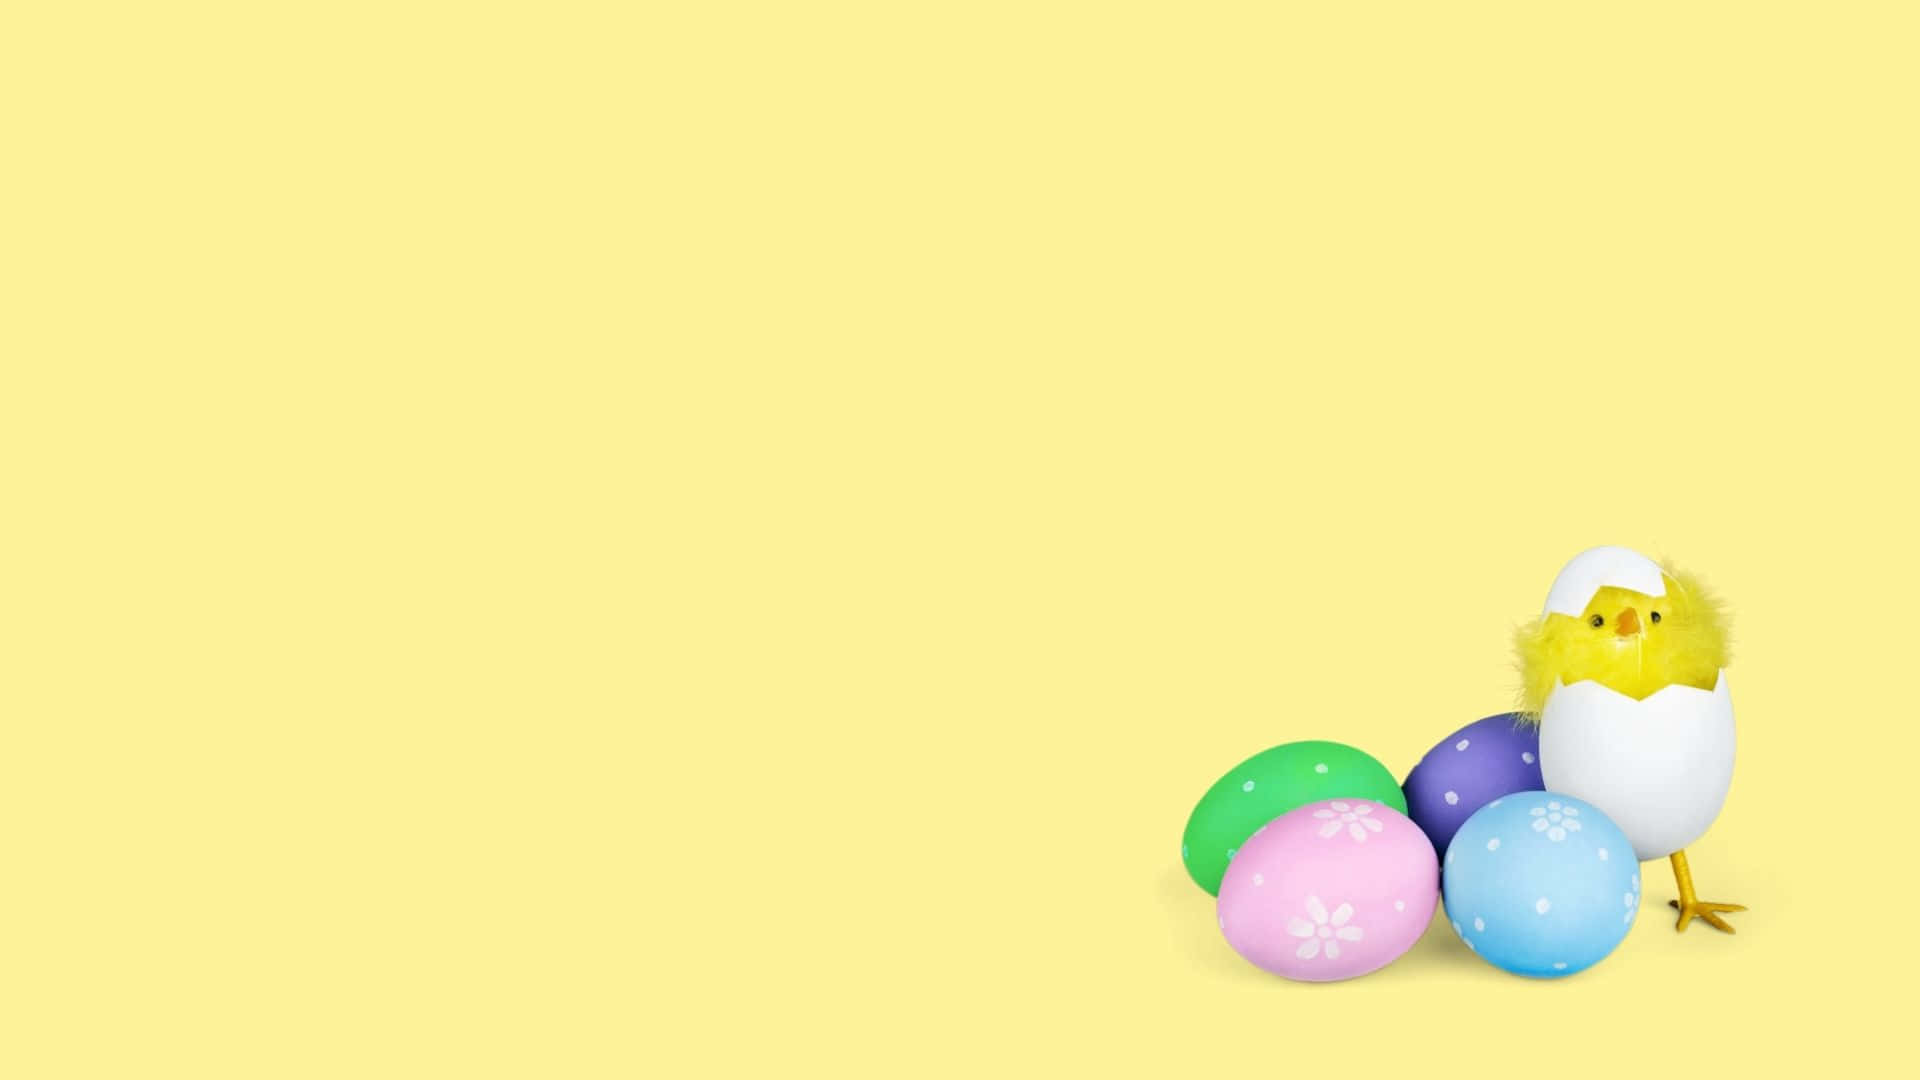 Colorful Easter eggs ready for a hunt. Wallpaper